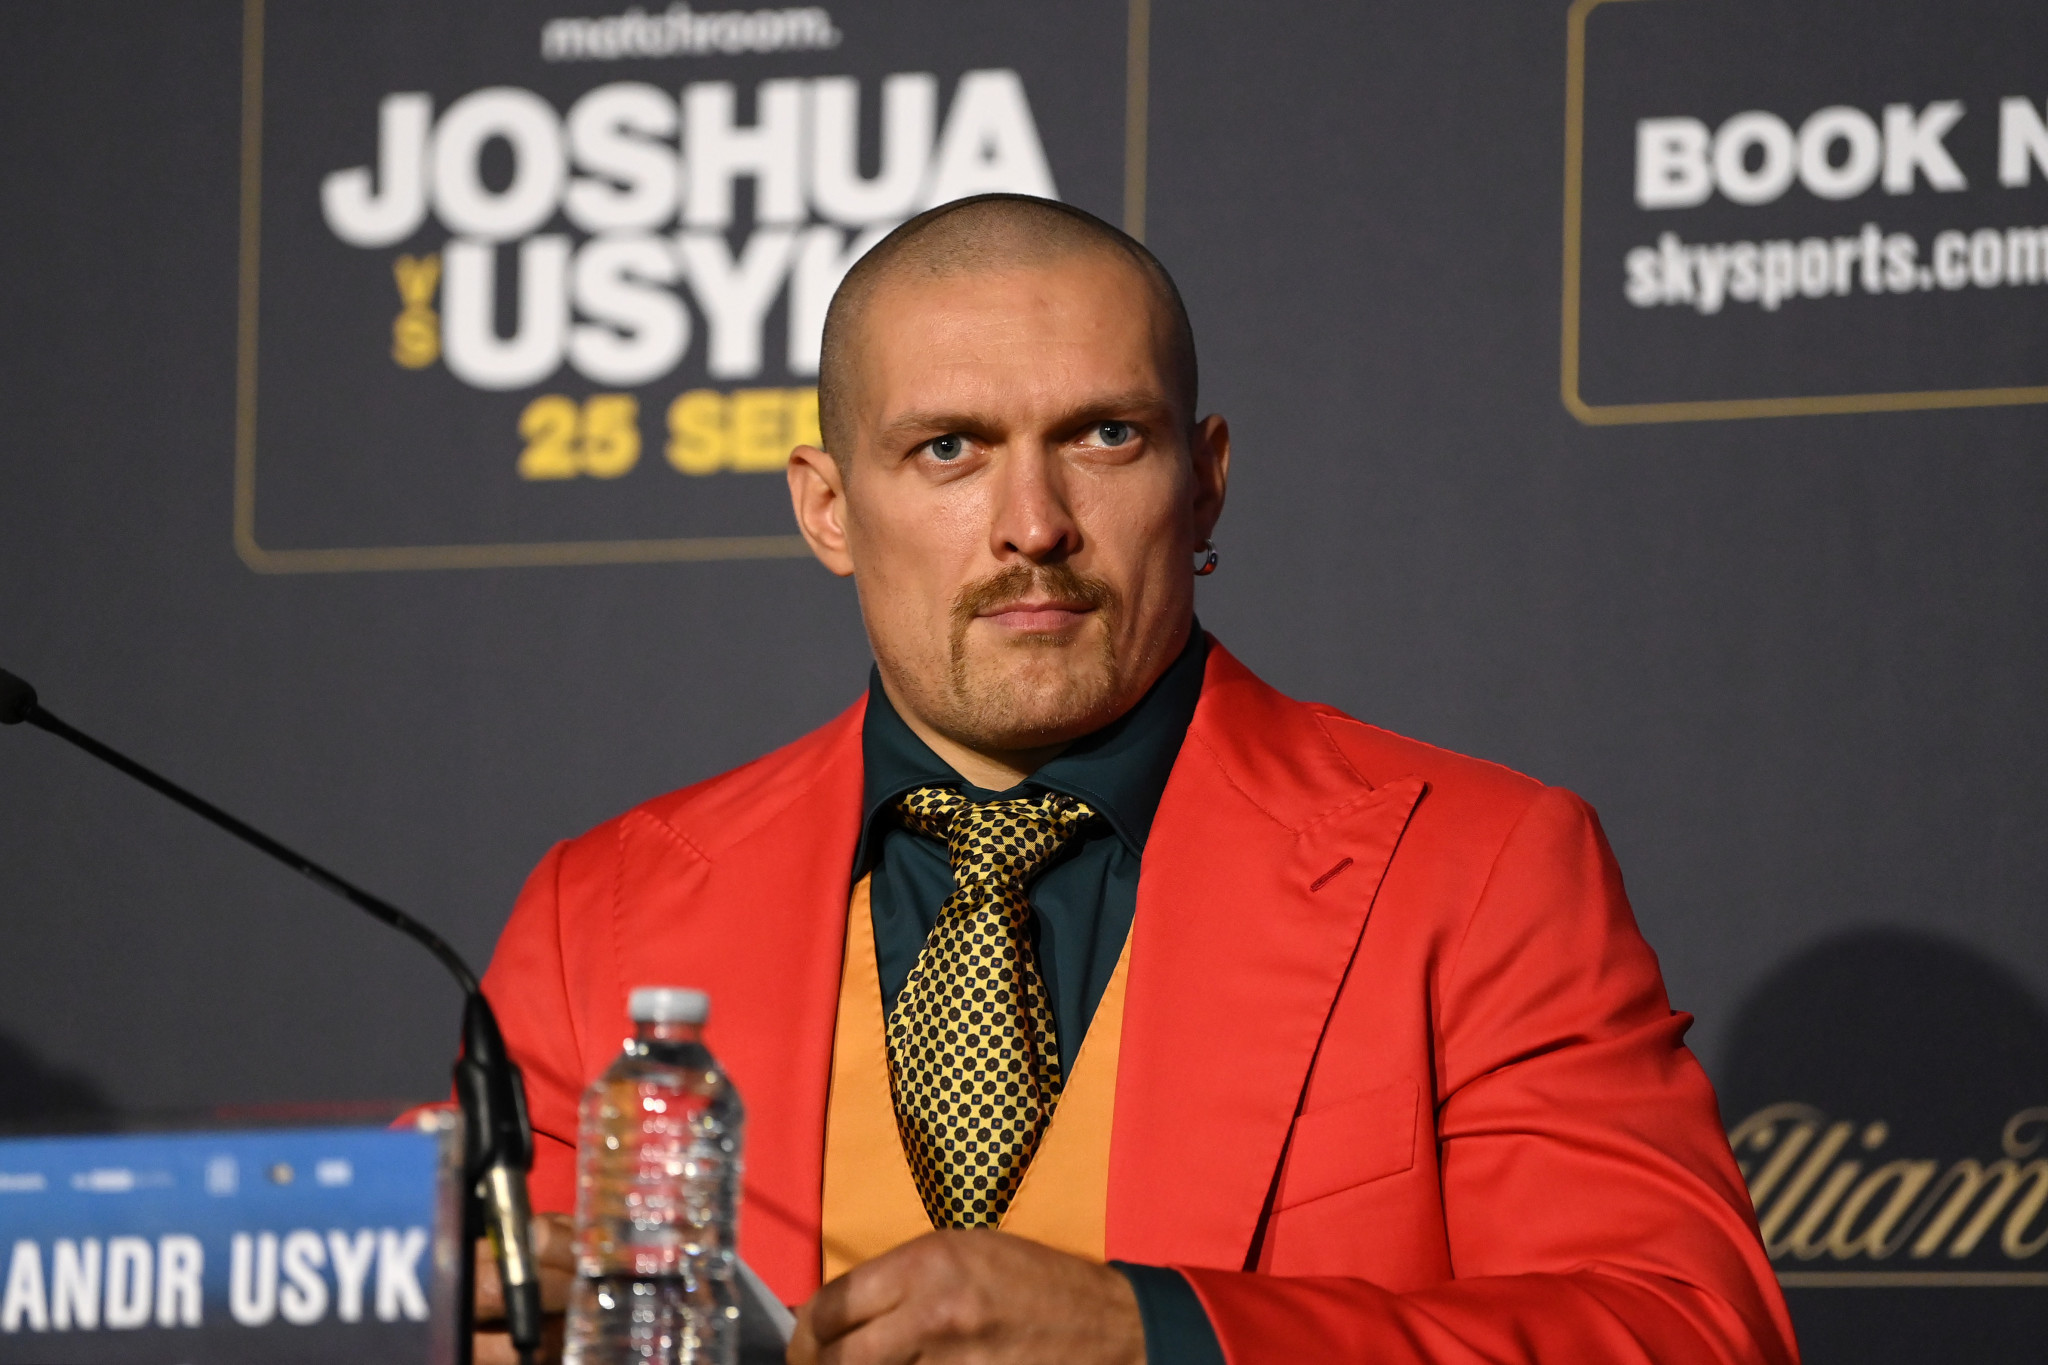 Olympic champion Usyk discusses fighting in Ukraine war as he prepares for boxing return  